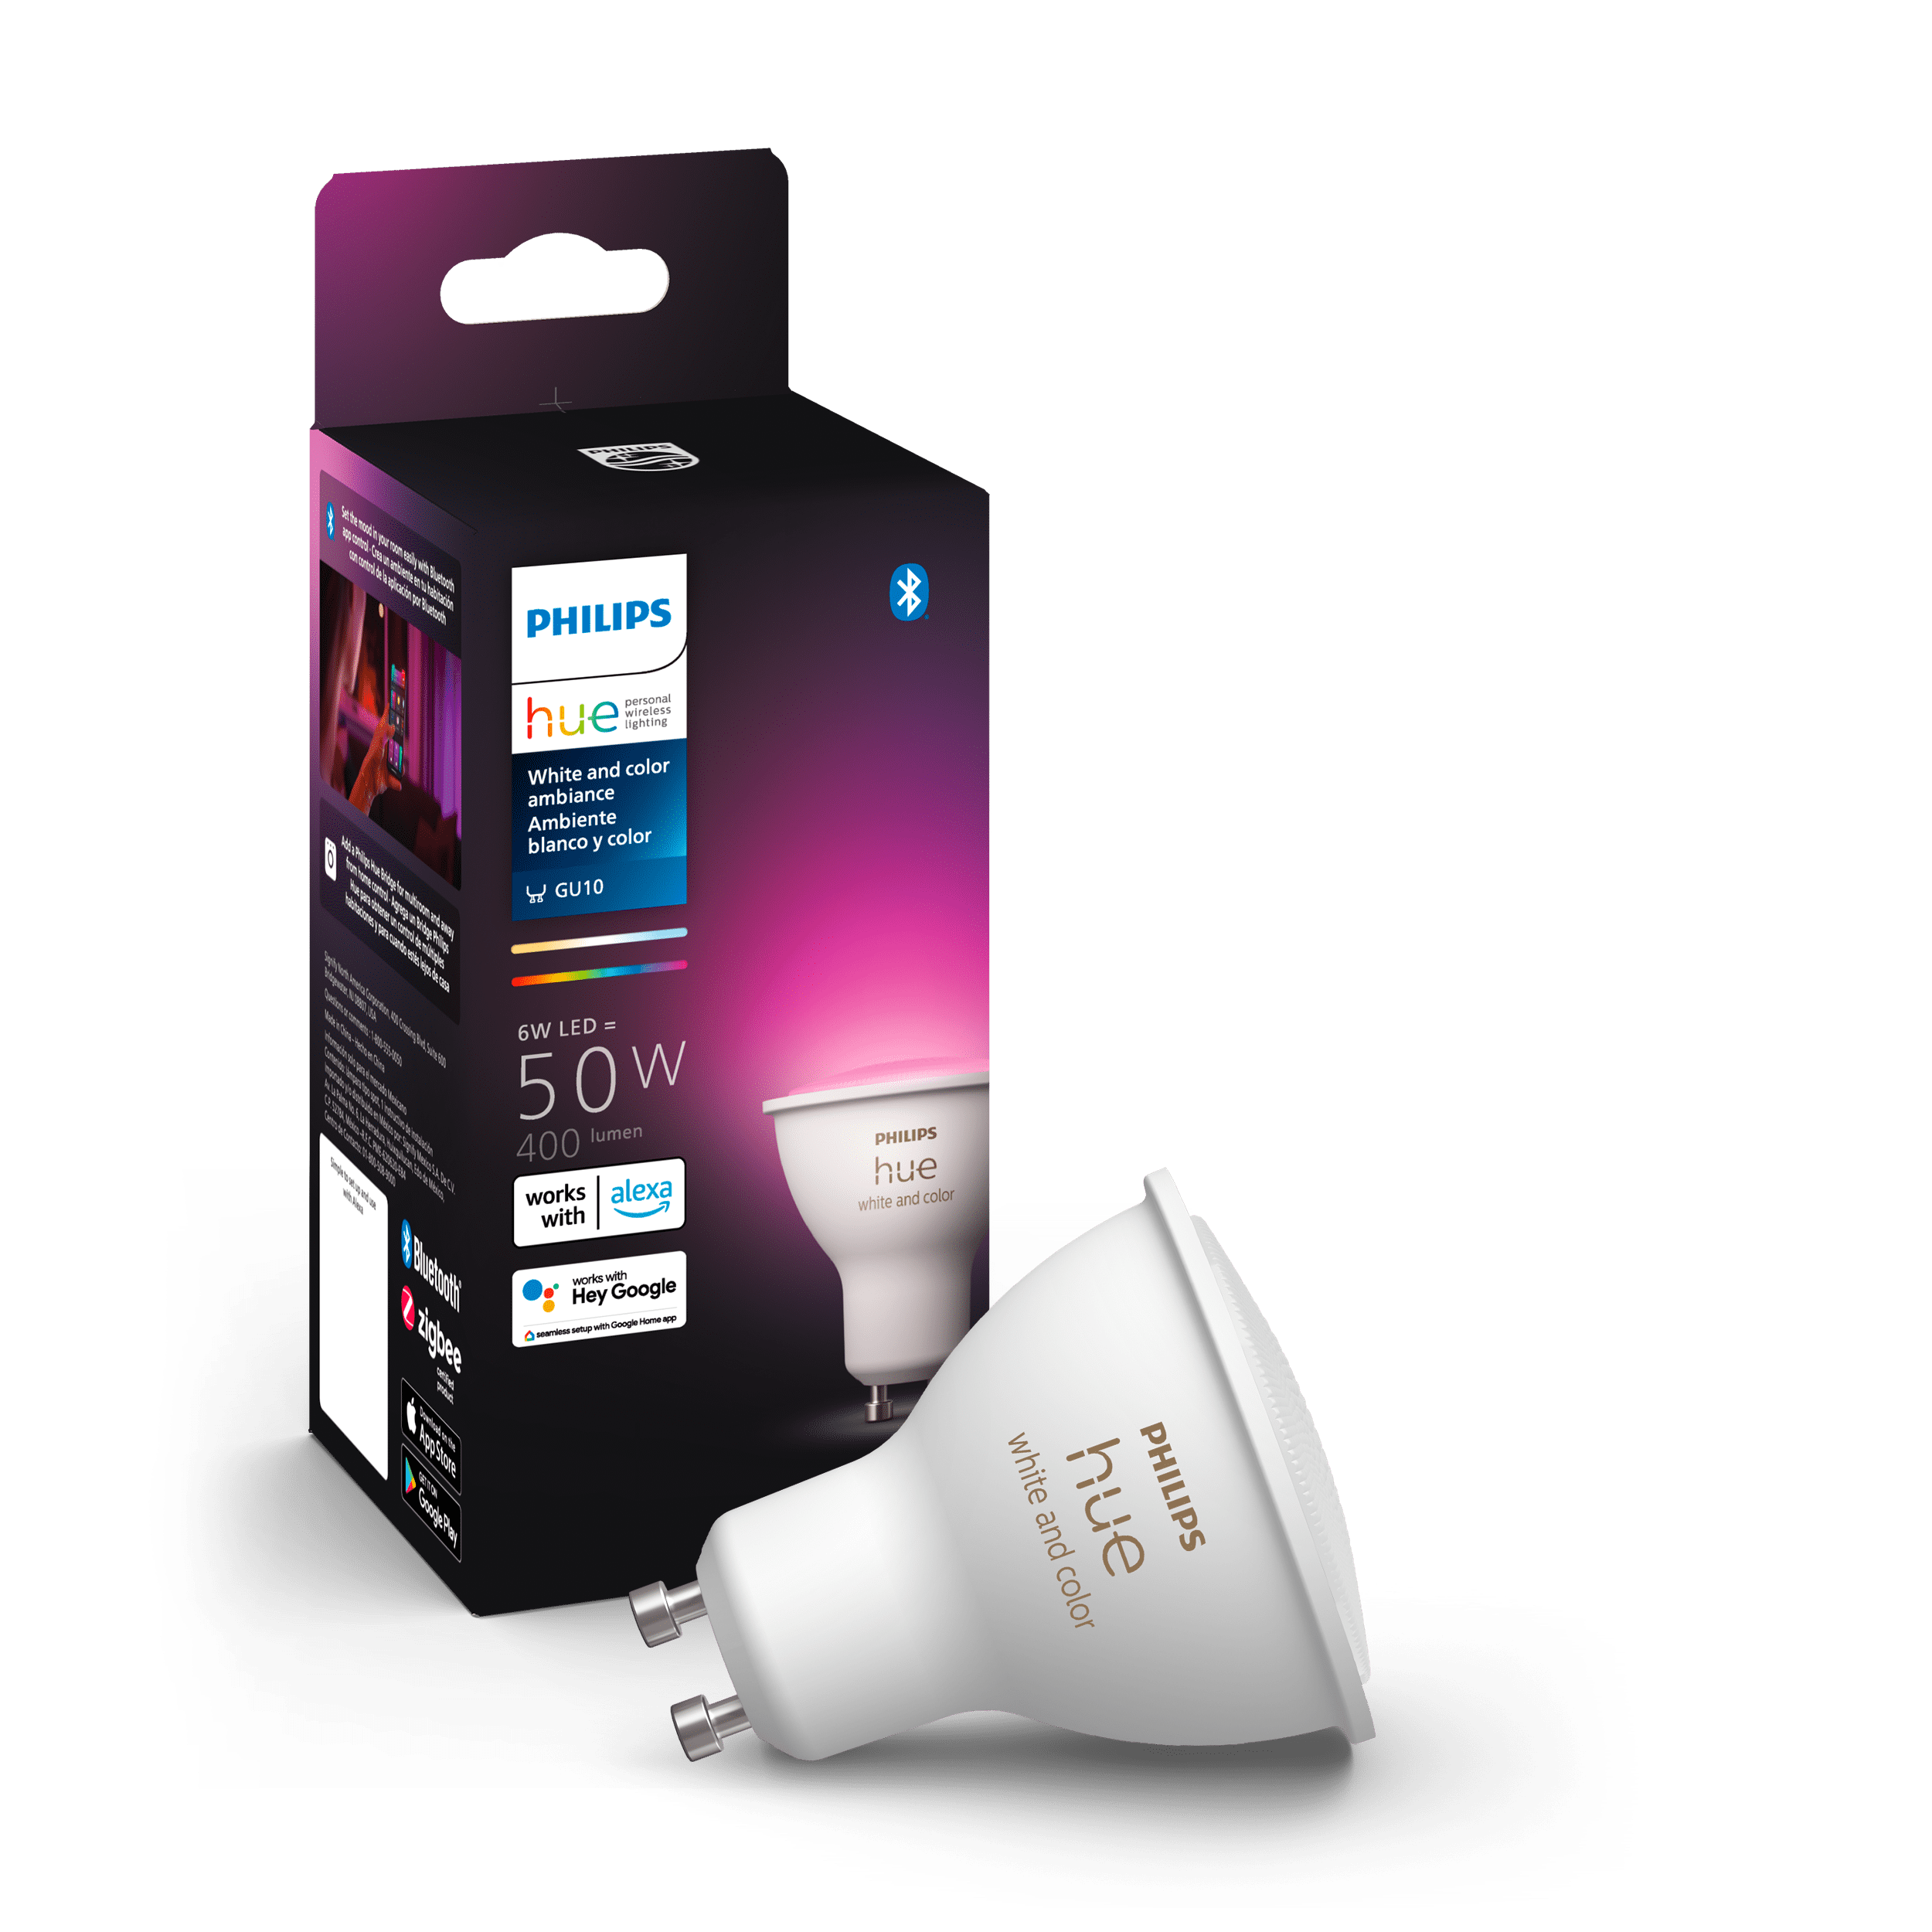 Philips Hue White and Color Bluetooth Smart LED Bulb -